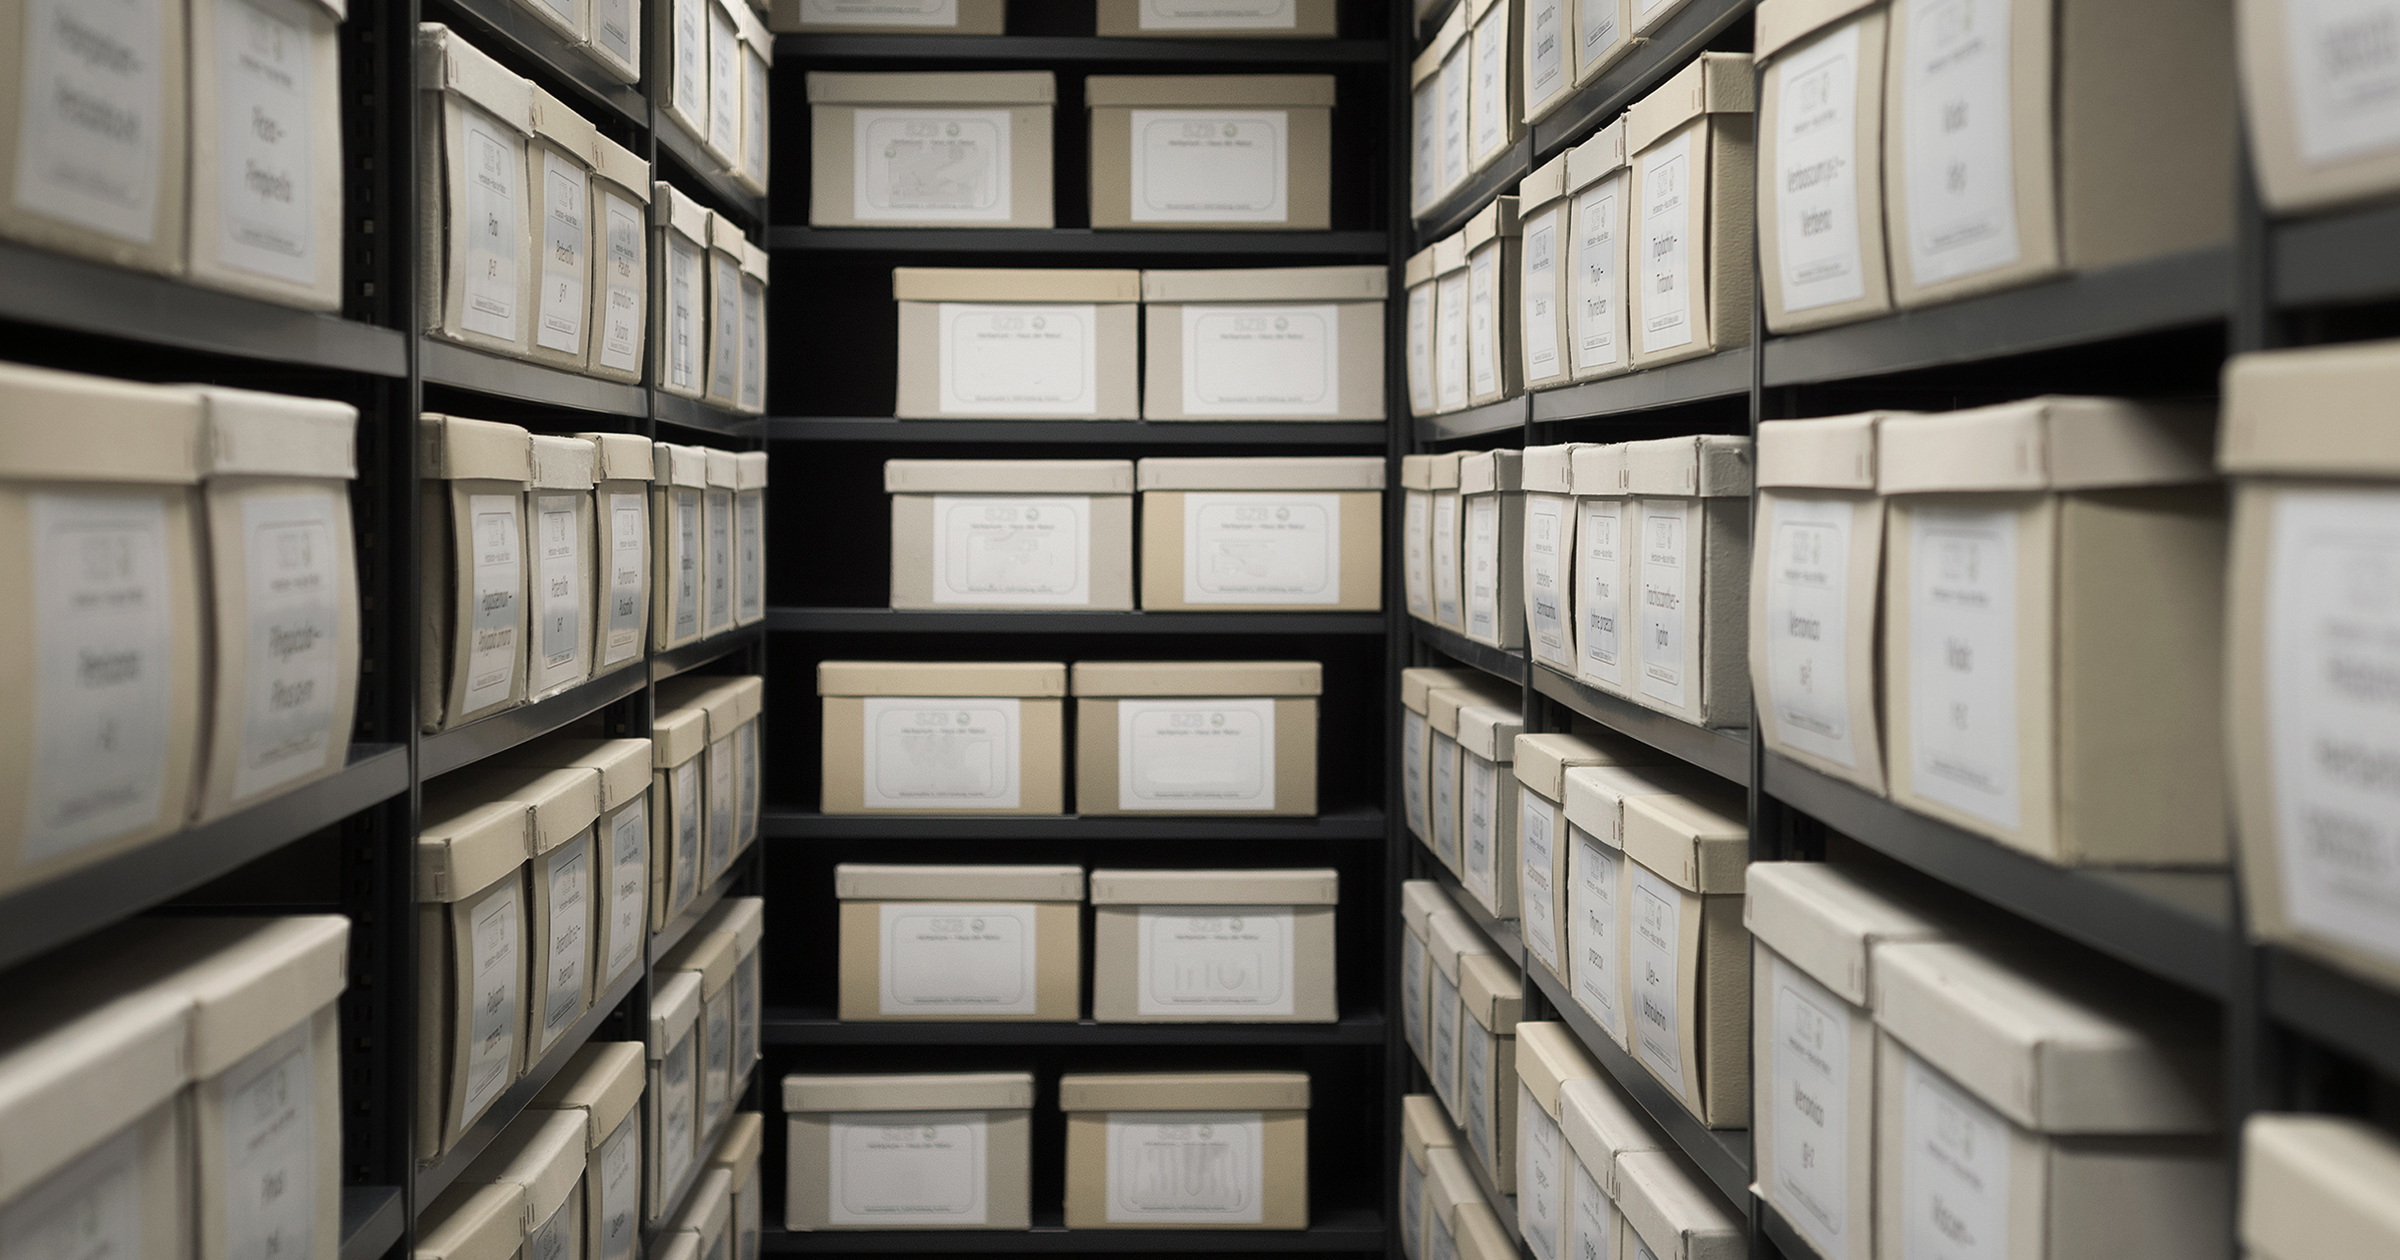 Digitising and indexing over 200,000 existing case files